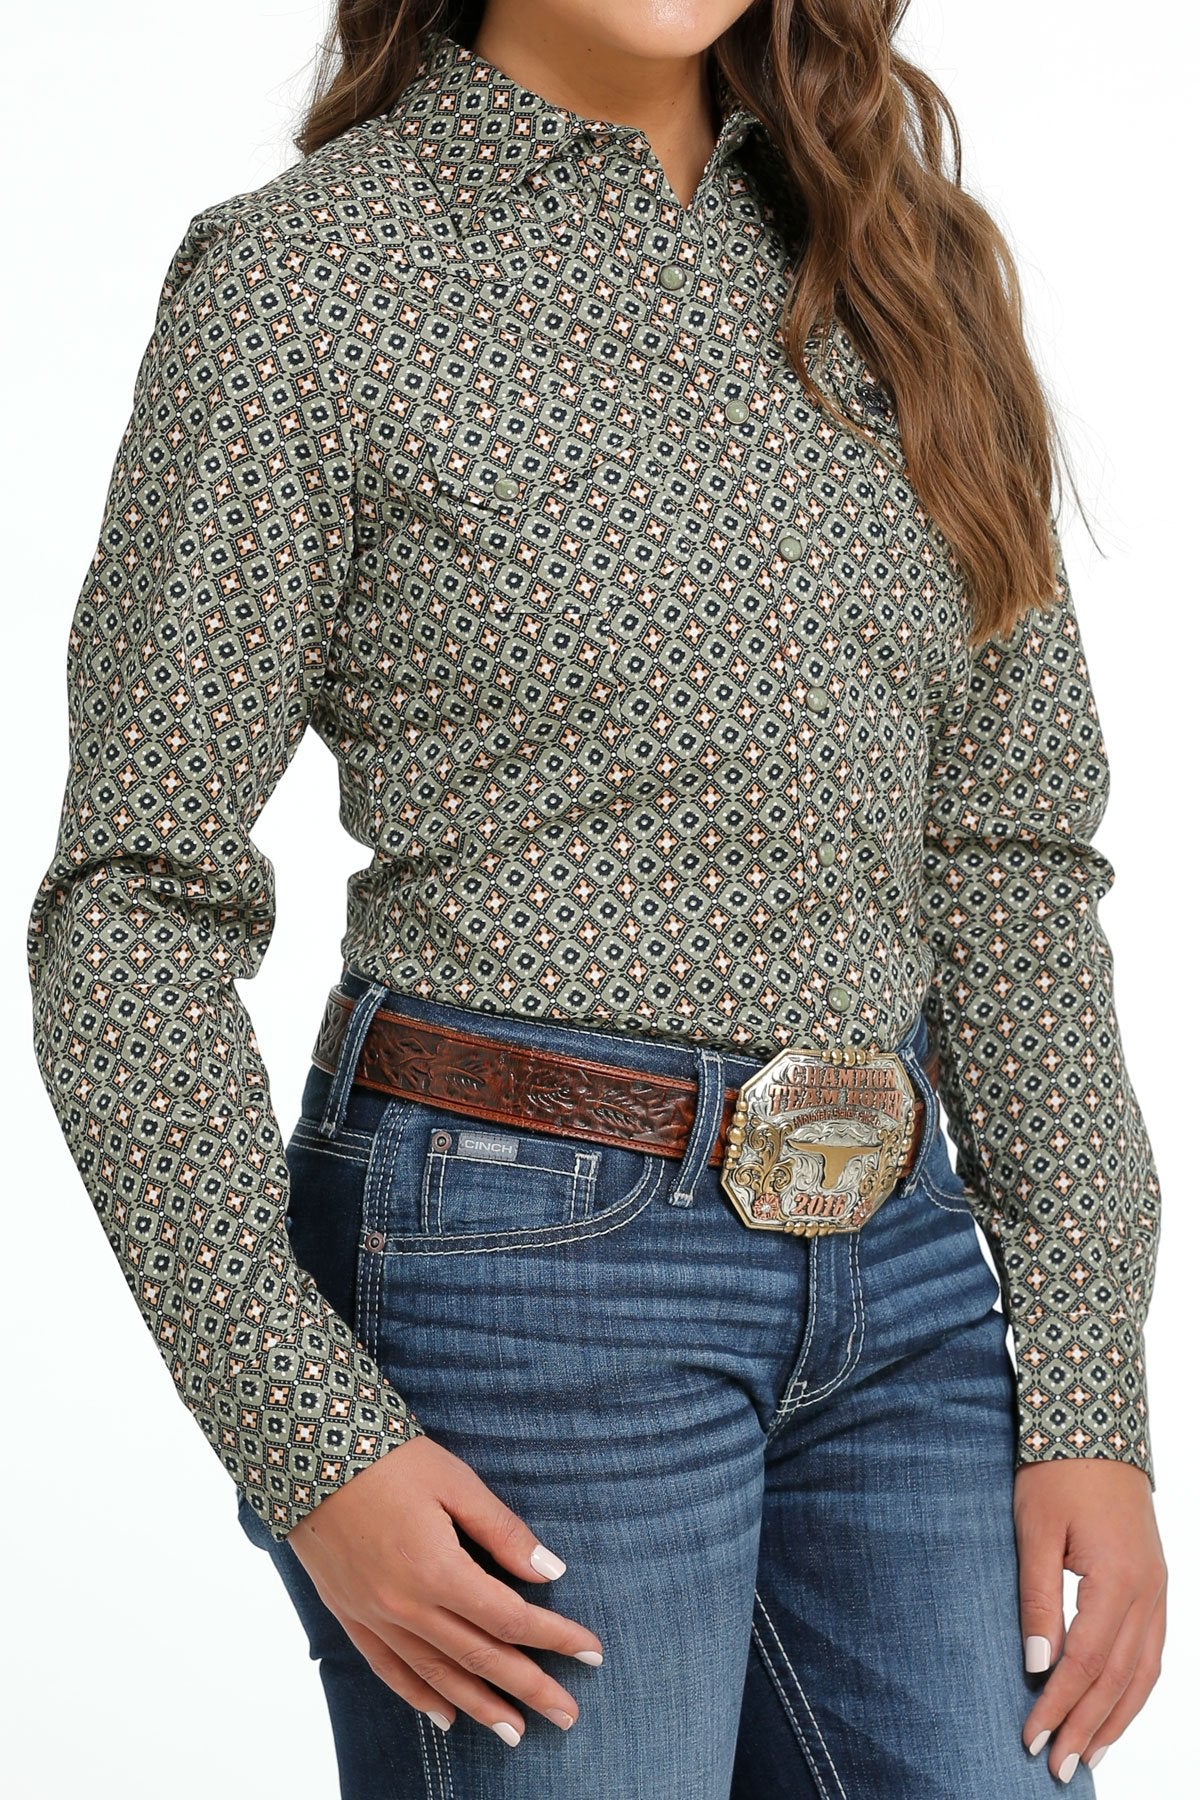 WOMEN'S SNAP FRONT WESTERN SHIRT - OLIVE  MSW9201044